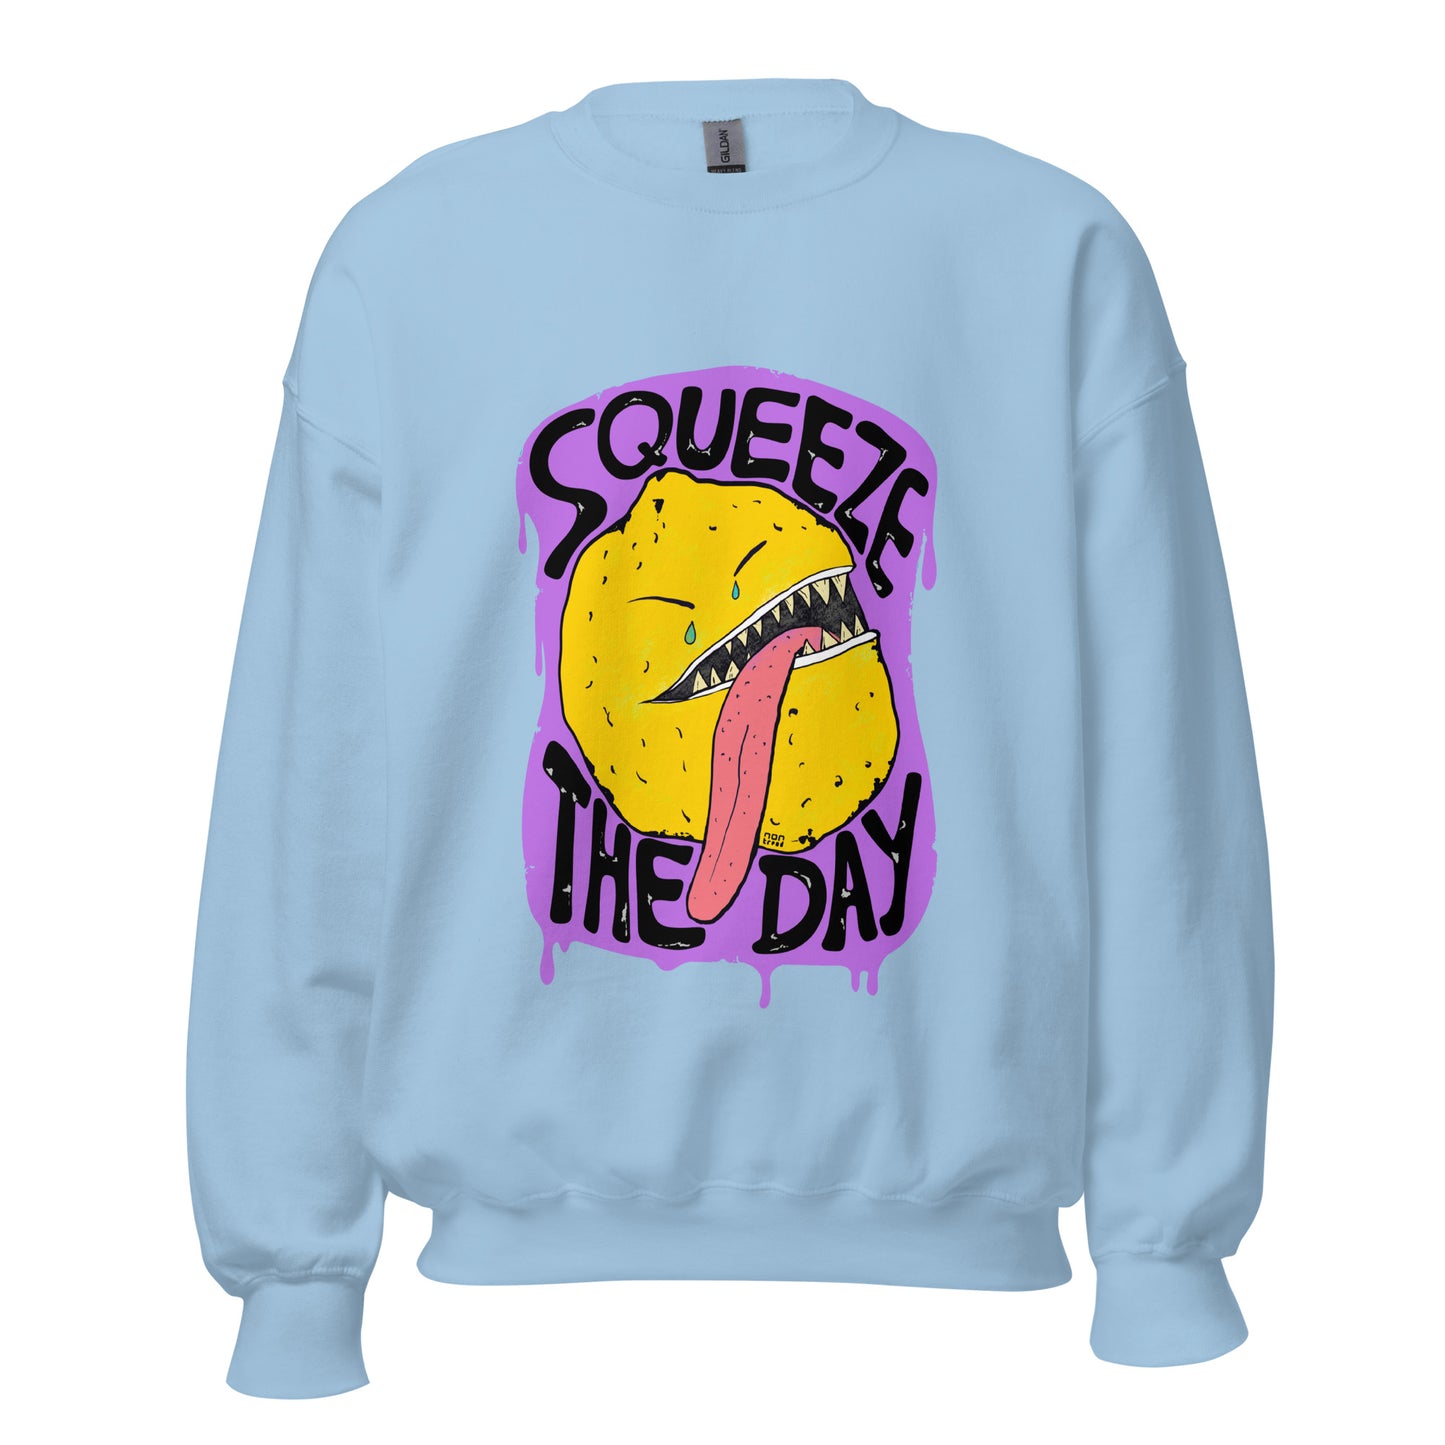 The Squeeze The Day Face Sweatshirt